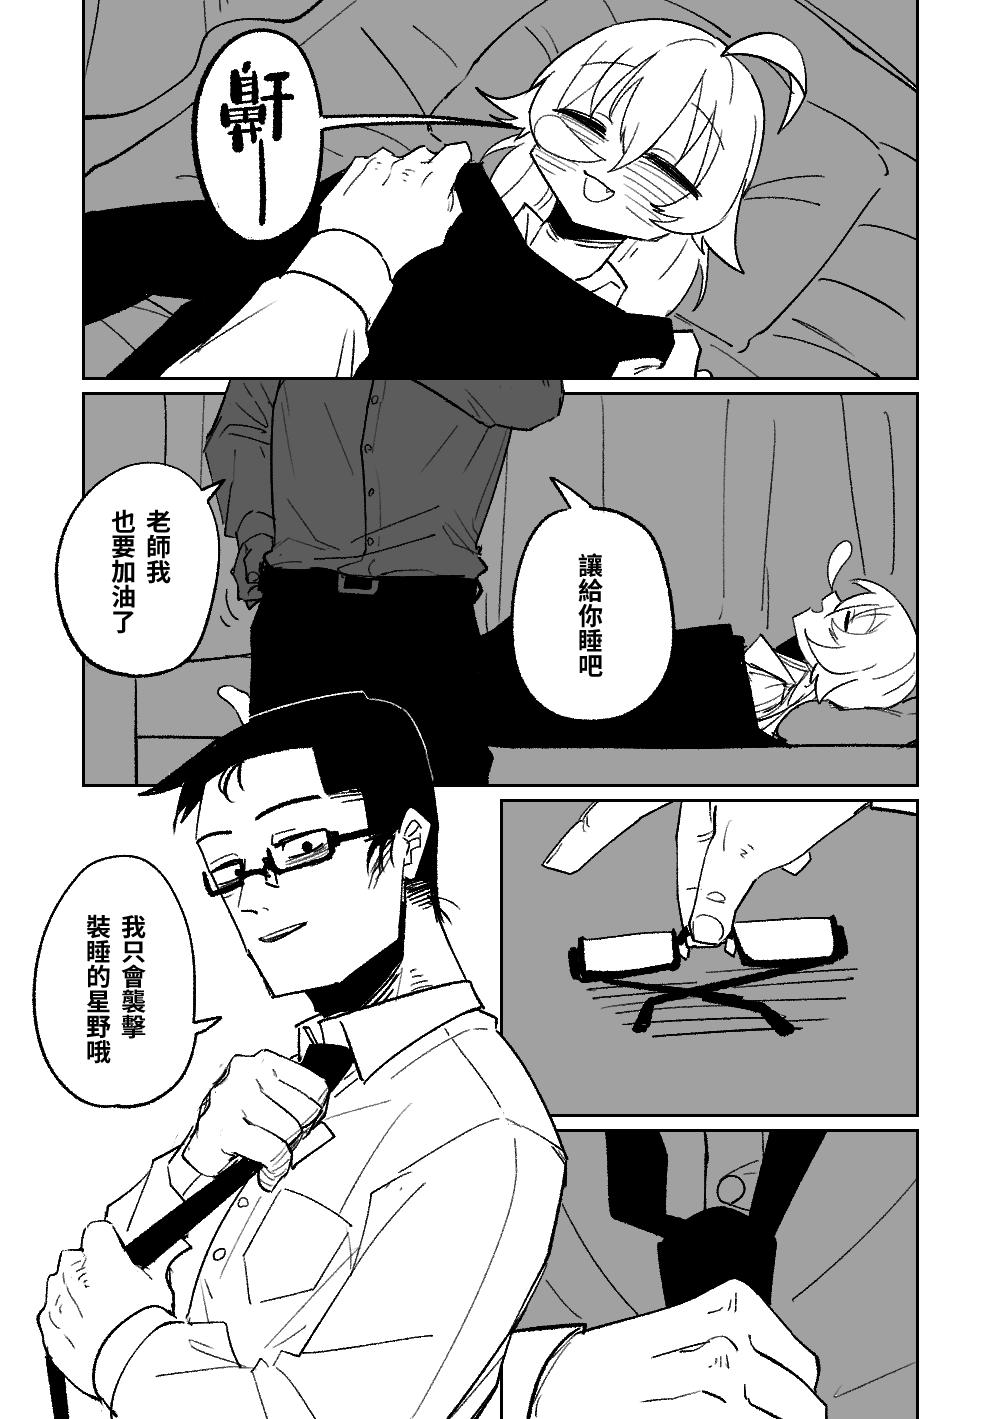 Piercing 找老師睡覺的星野 - Blue archive Swing - Page 4